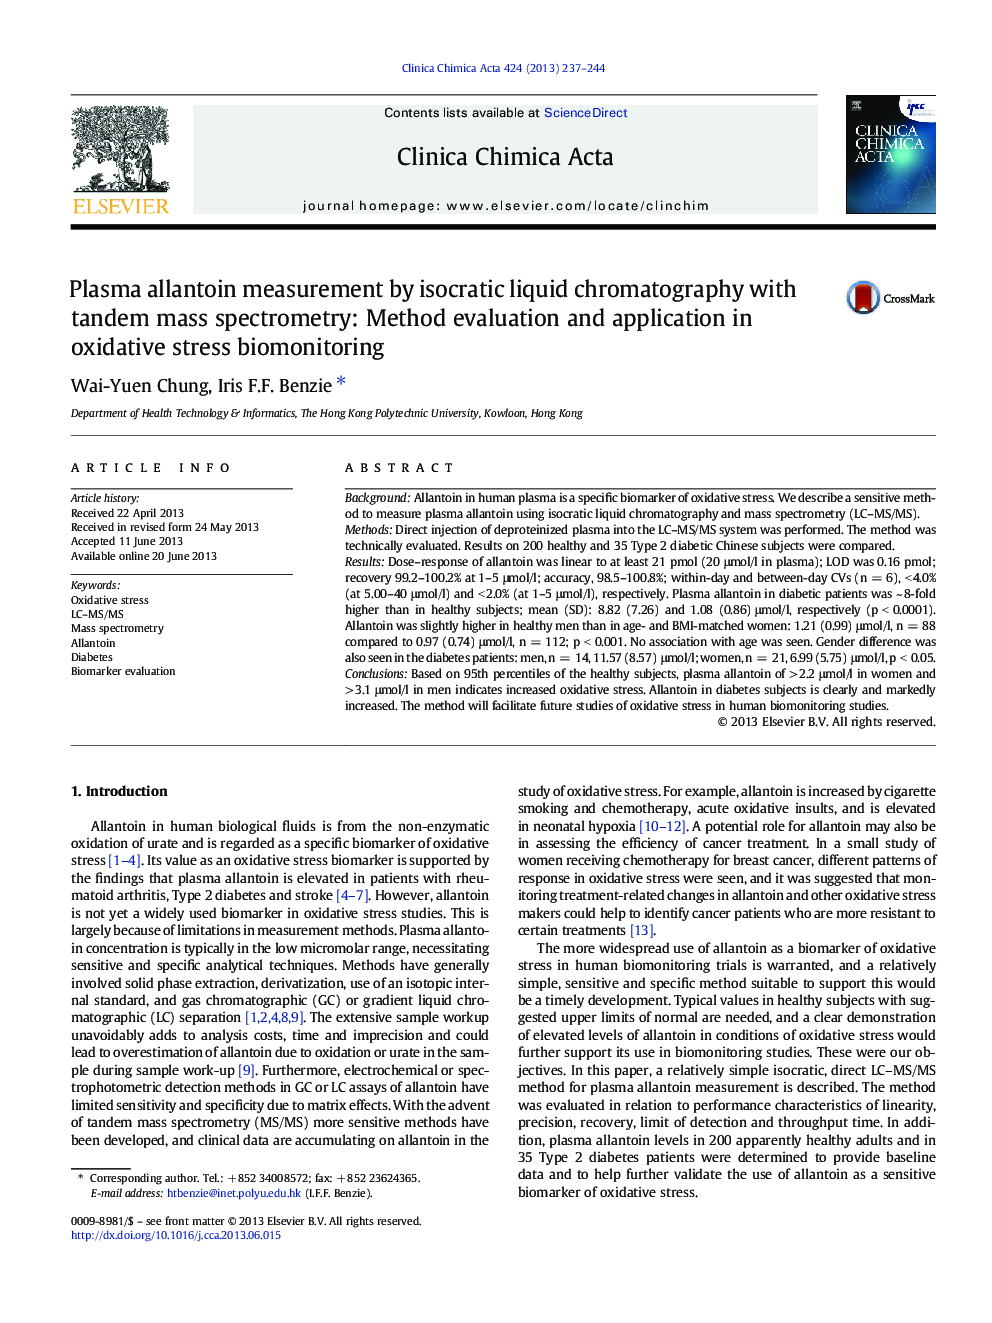 Plasma allantoin measurement by isocratic liquid chromatography with tandem mass spectrometry: Method evaluation and application in oxidative stress biomonitoring